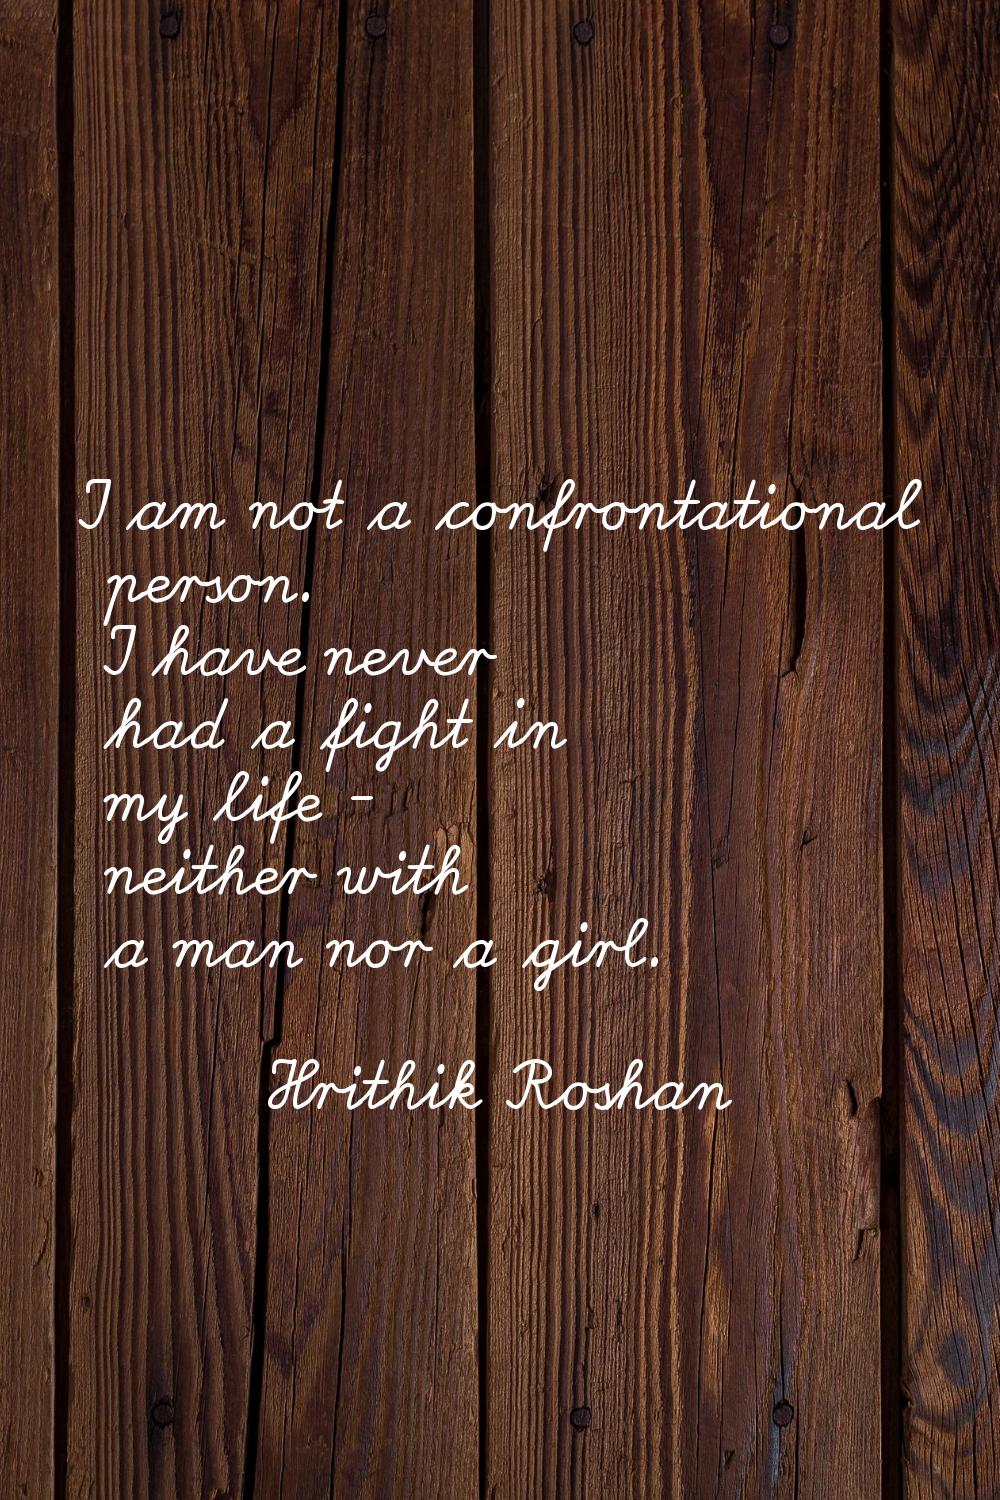 I am not a confrontational person. I have never had a fight in my life - neither with a man nor a g